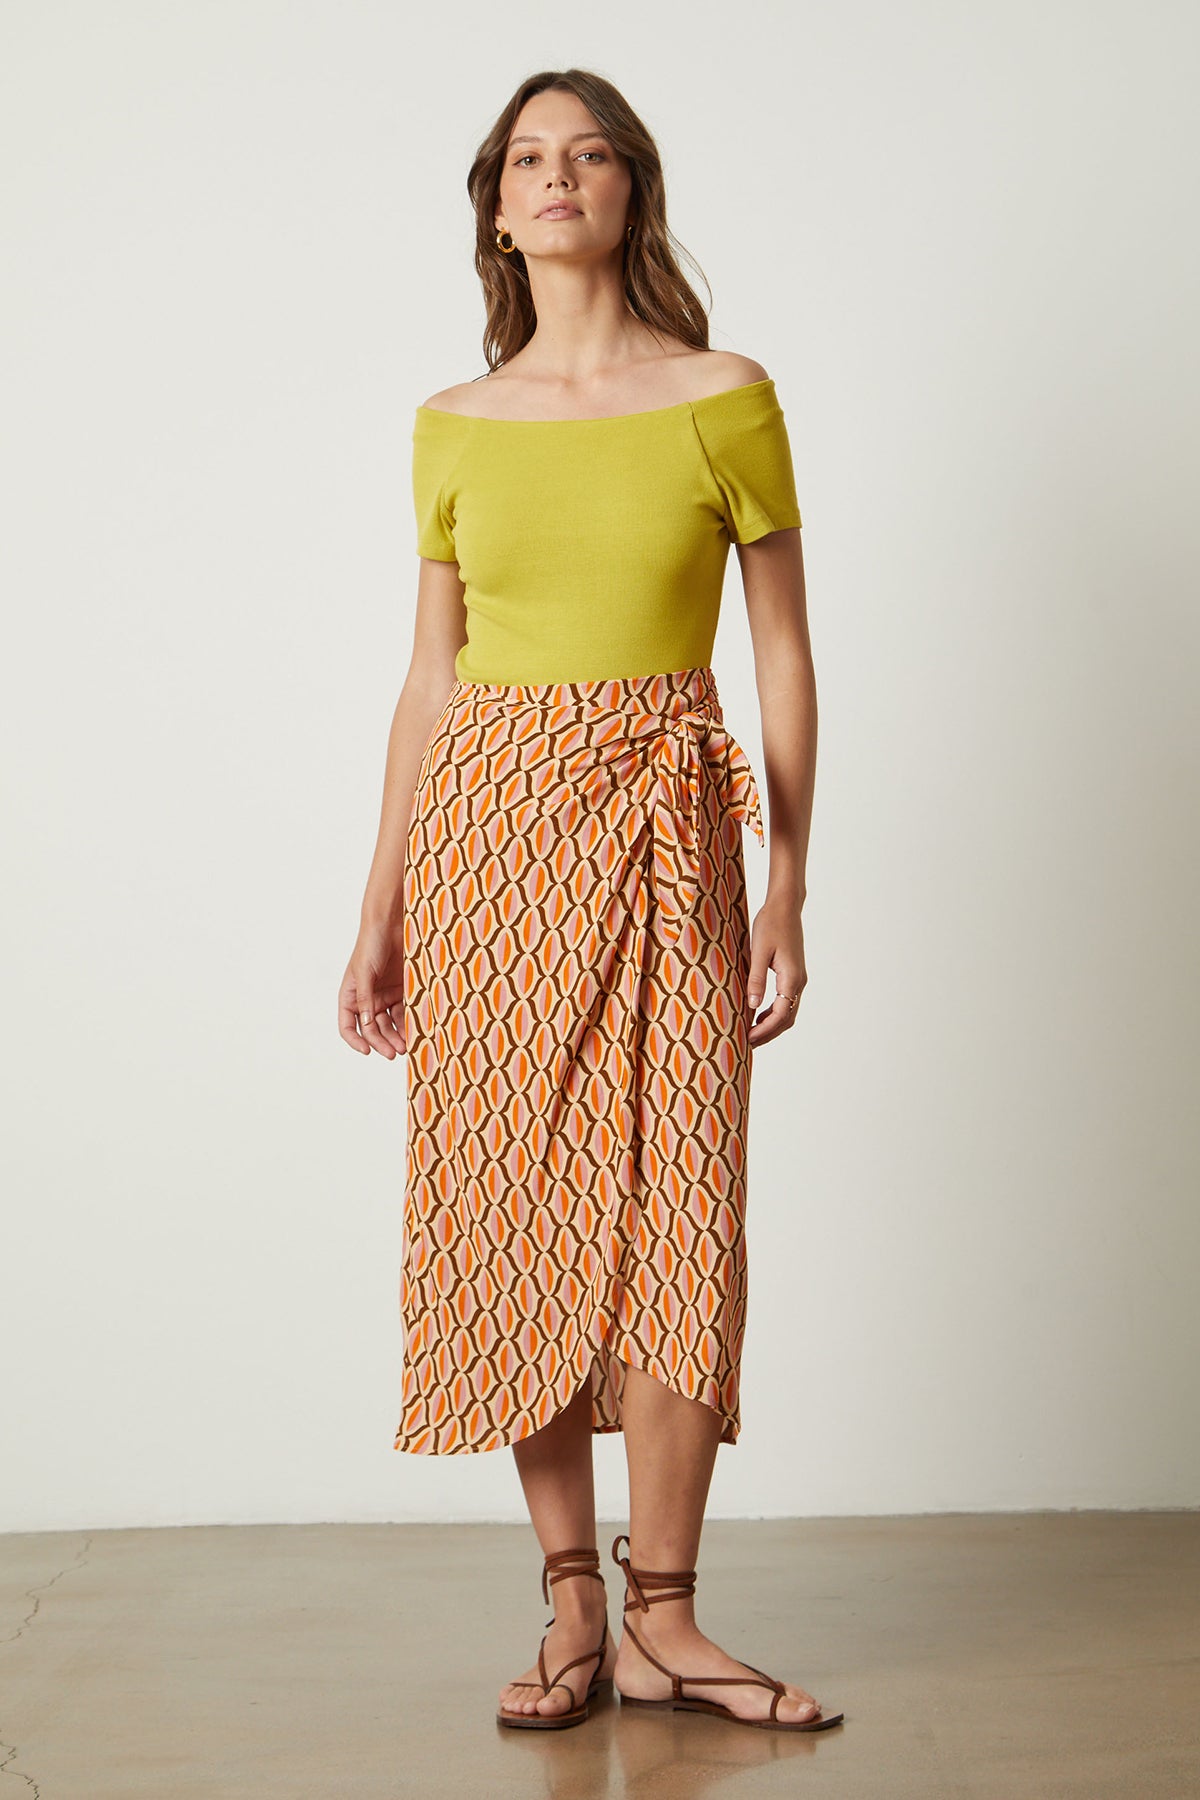 Alisha skirt in orange geometric pattern with Eloise body suit in sundance yellow with sandals full length front-26078932009153